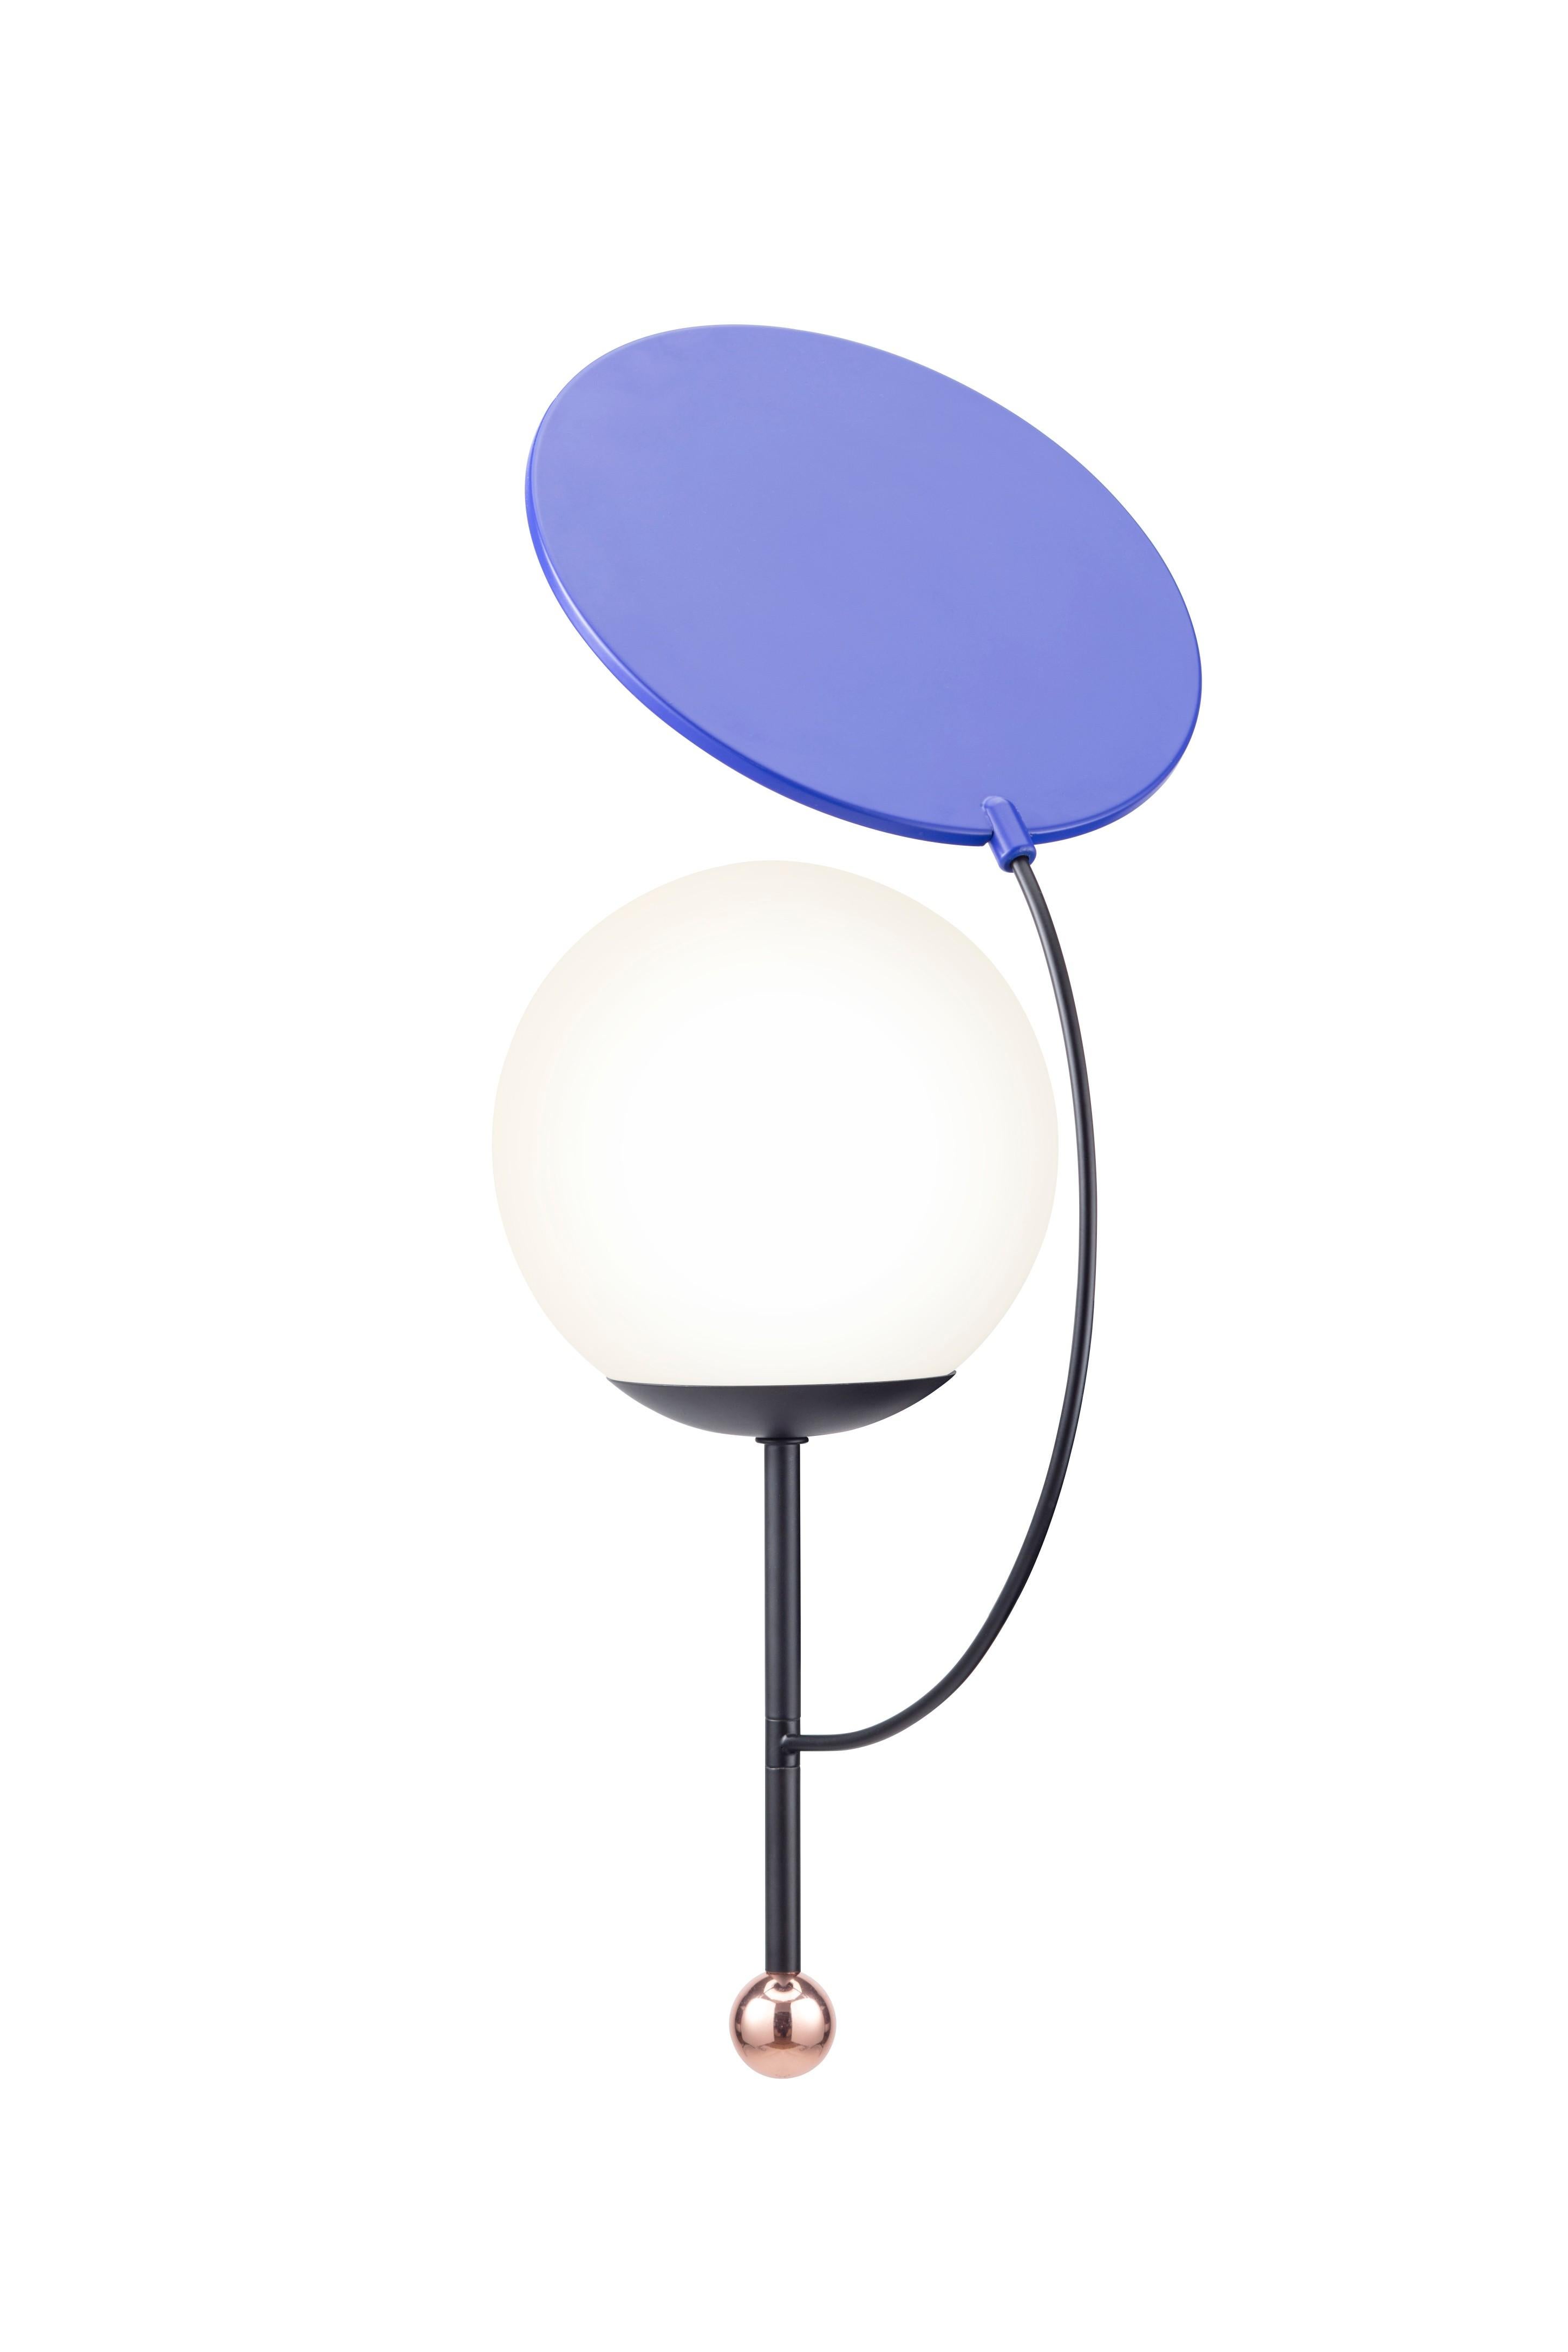 Colorful wall lamp by Thomas Dariel, Maison Dada
Measures: Diameter 24 x height 57.2 cm
Base and arm – Black powder coated metal with matte finish
Plated metal ball coated with glossy copper finish
Rotating top – Blue powder coated metal /